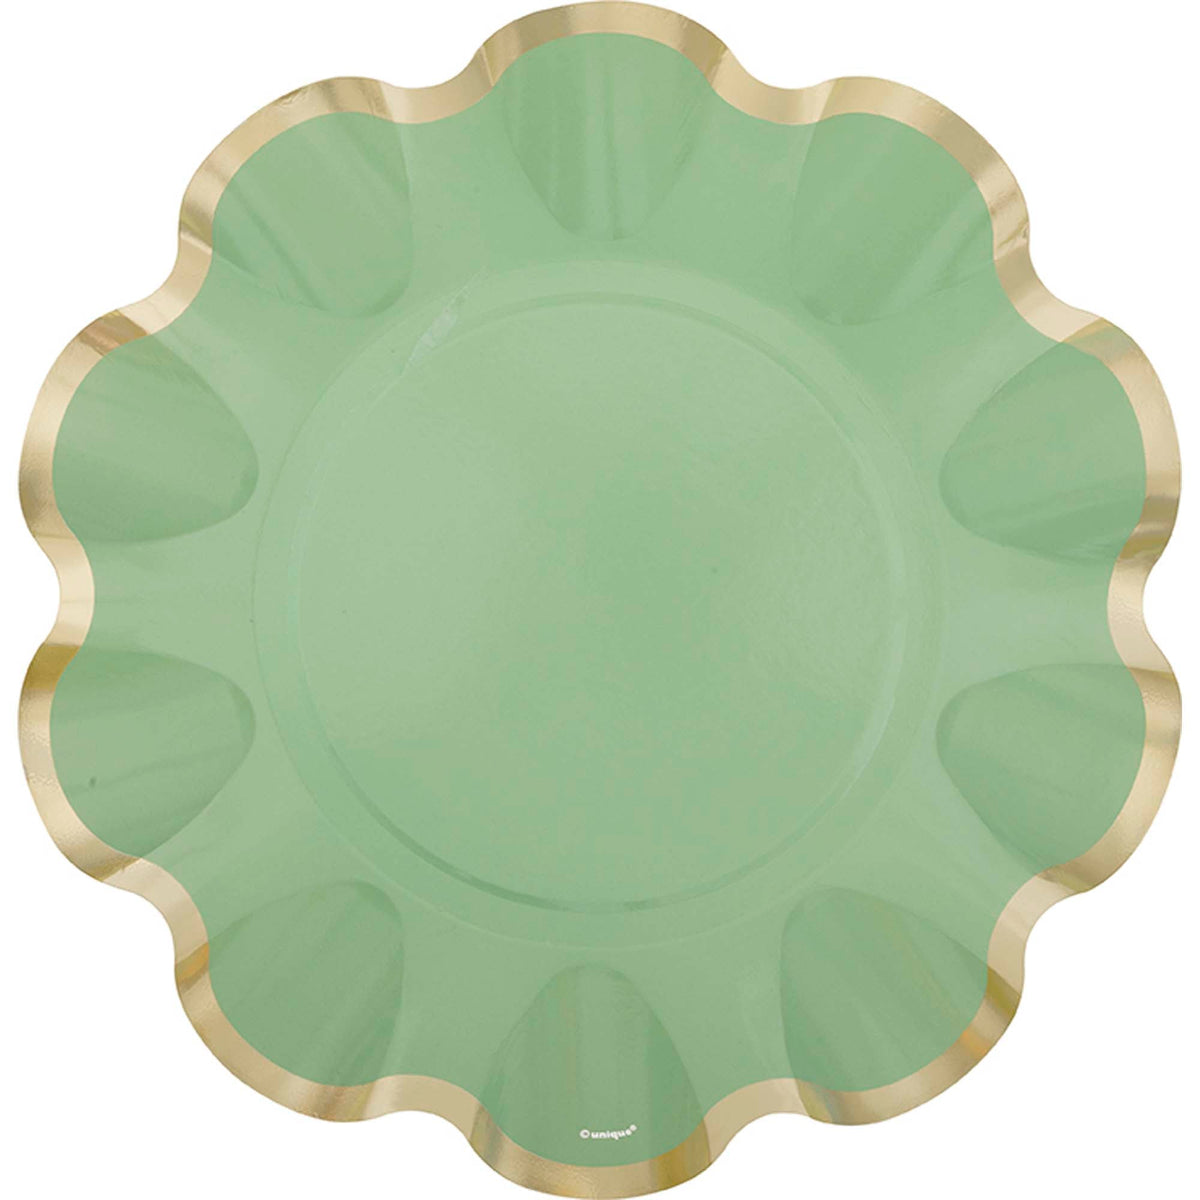 UNIQUE PARTY FAVORS Easter Dainty Easter Large Flower Shaped Lunch Paper Plates, Sage Green, 9 Inches, 8 Count